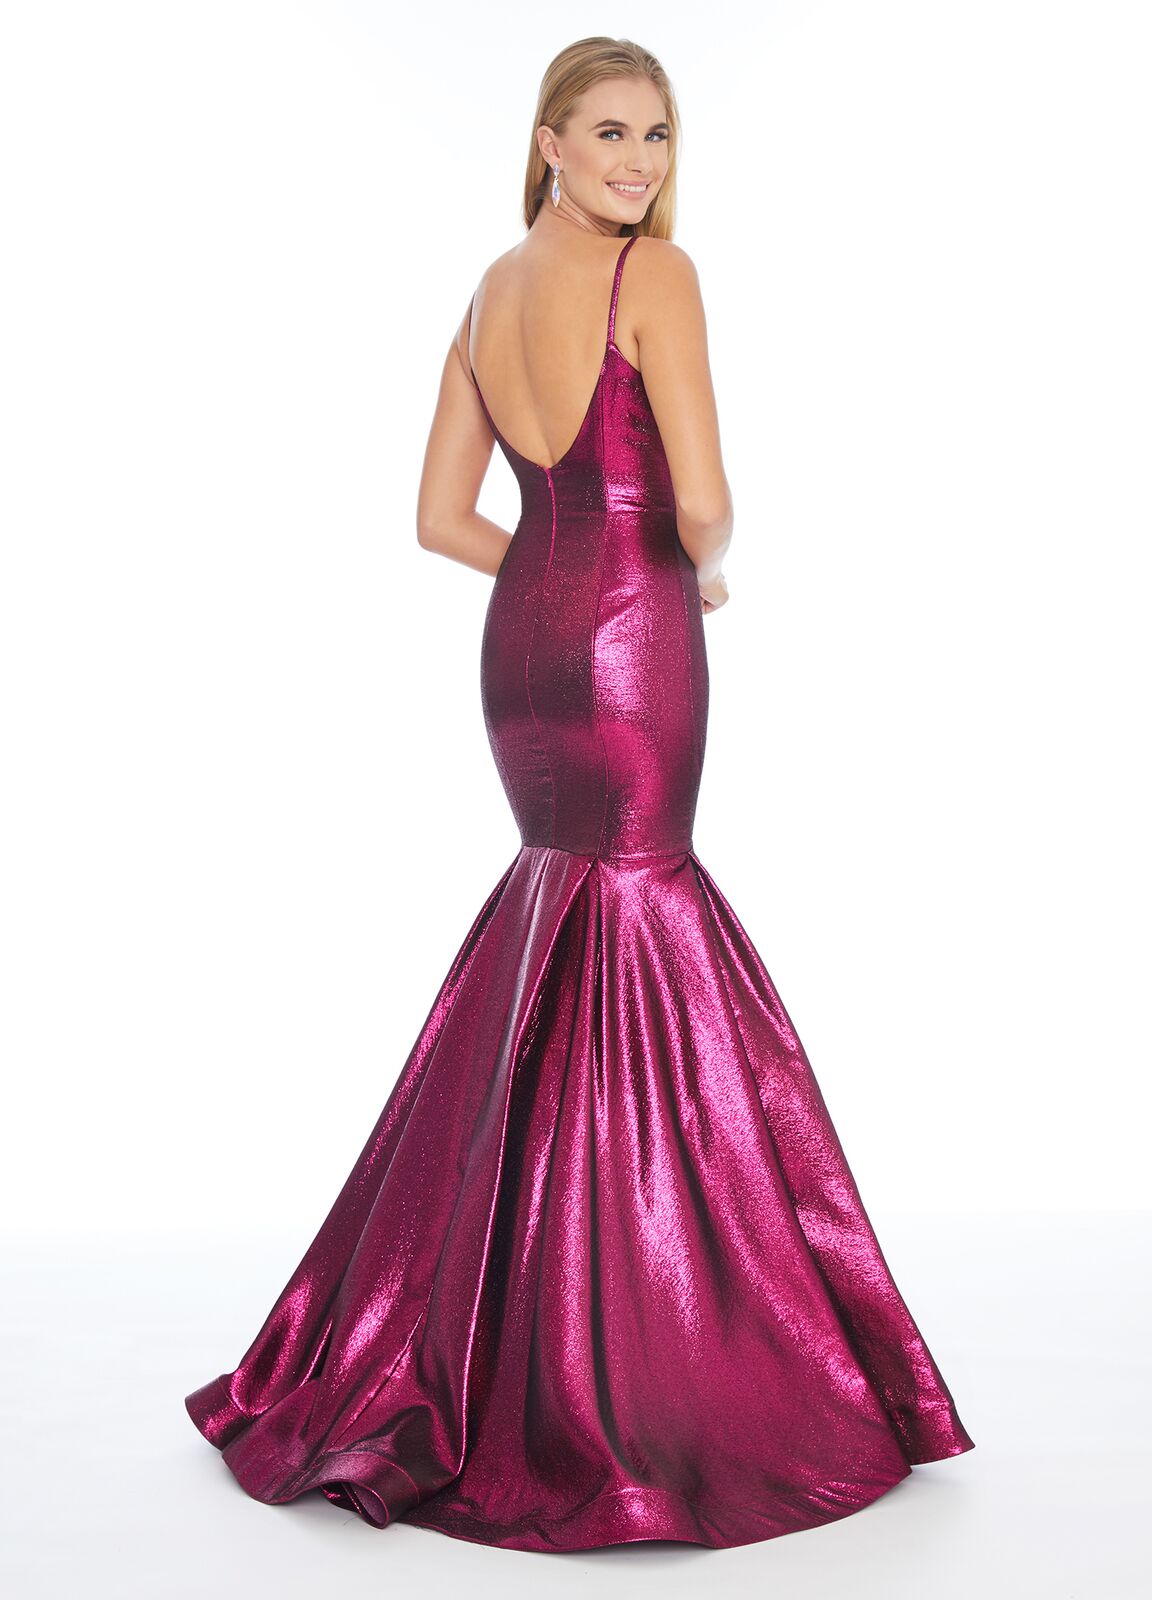 Ashley Lauren 1860 v neckline metallic brocade mermaid prom dress evening gown pageant gown Long Fitted metallic mermaid prom dress Pageant Gown Metallic madness! Metallic is all the rage this season. This V-neck spaghetti strap gown complete with a fit and flare skirt is sure to stand out. Glass Slipper Formals